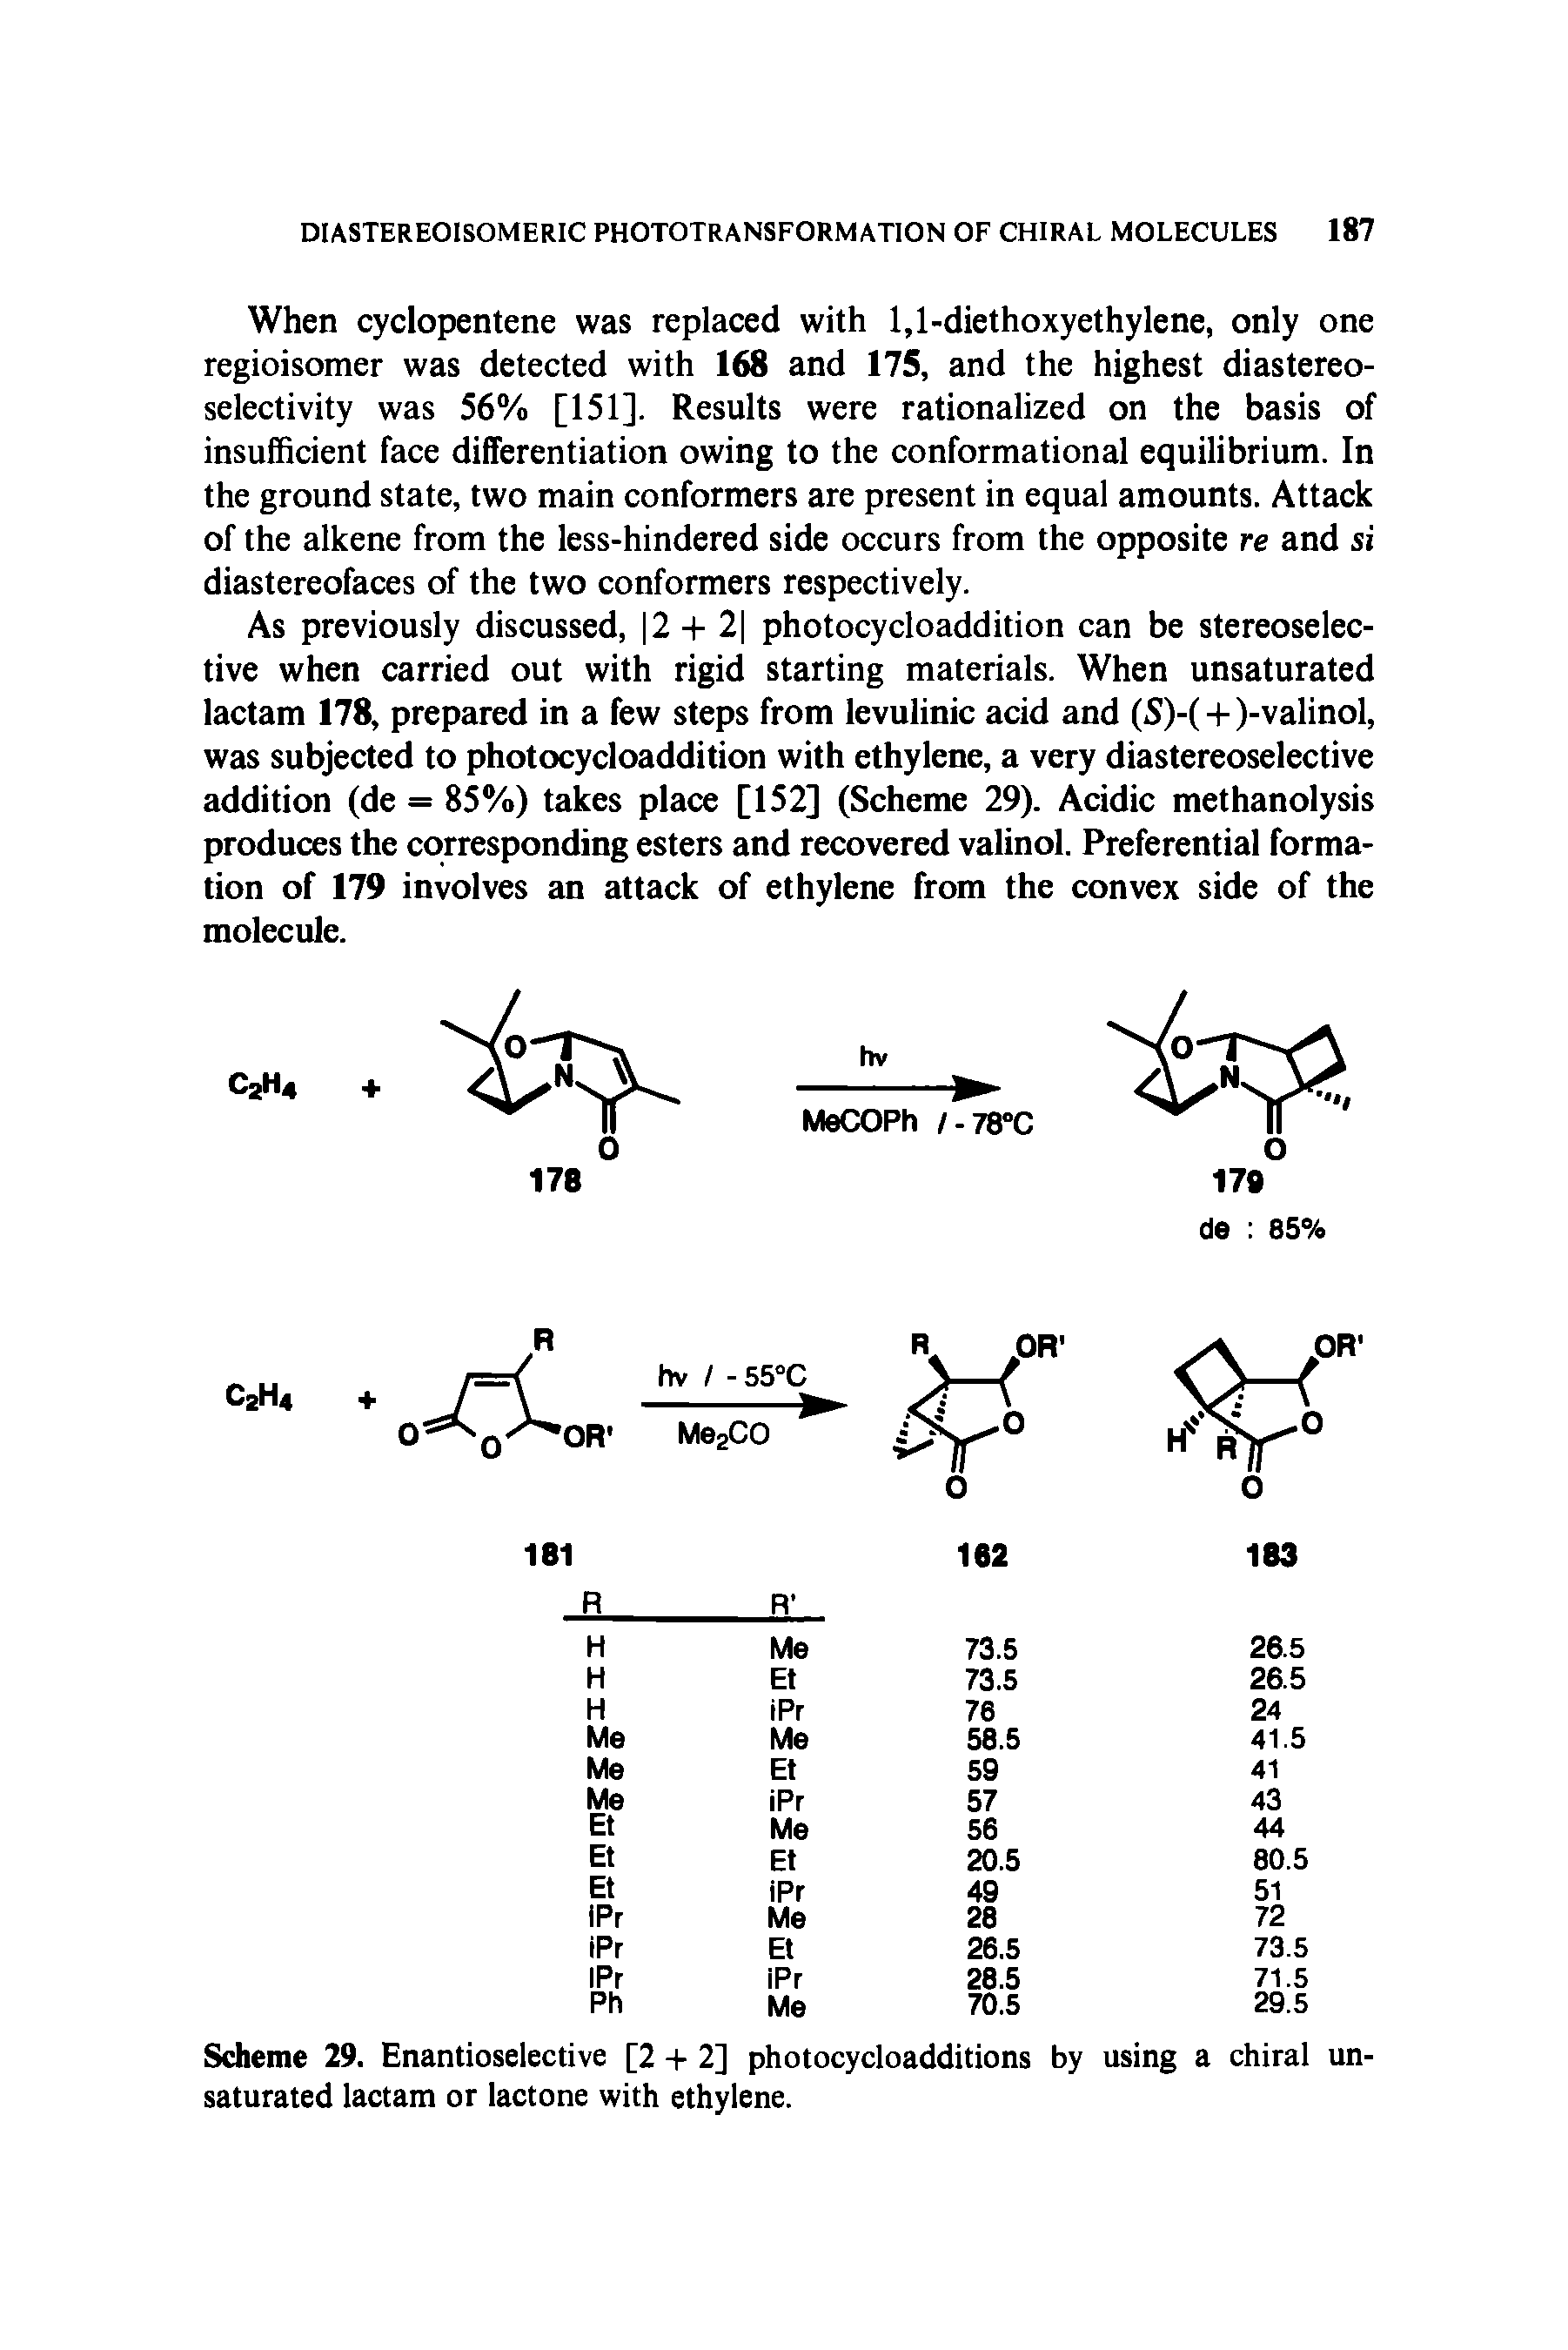 Scheme 29. Enantioselective [2 -1- 2] photocycloadditions by using a chiral unsaturated lactam or lactone with ethylene.